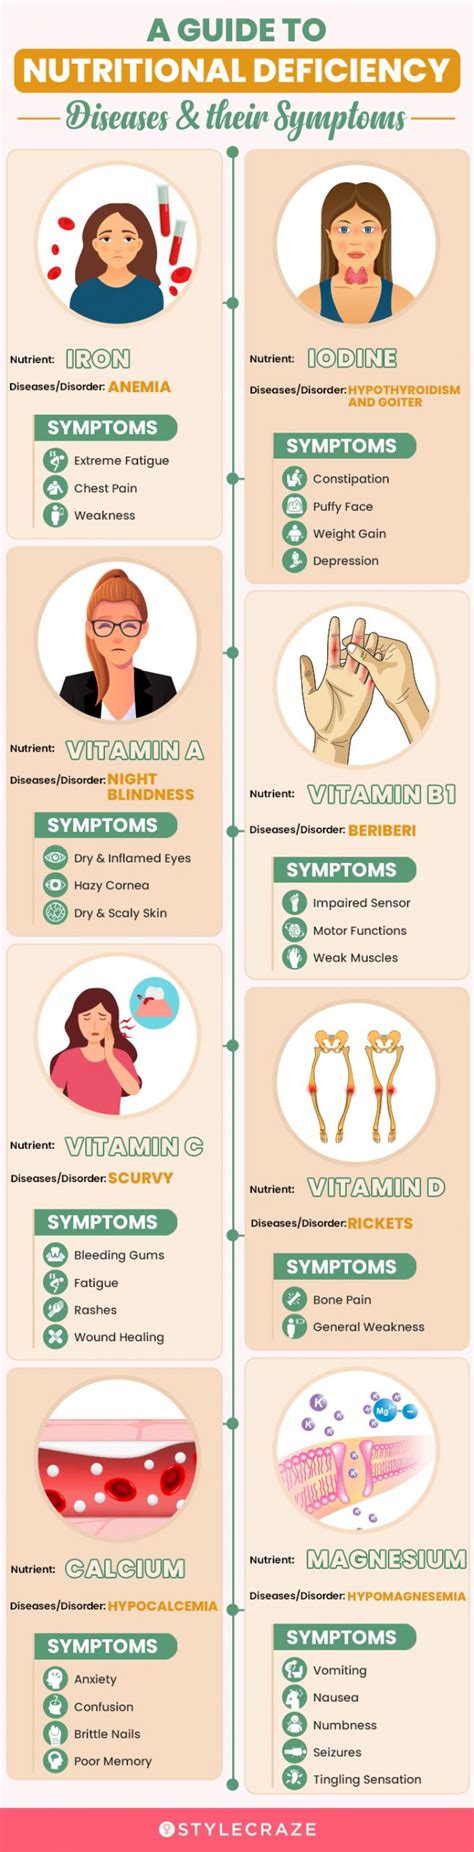 Nutritional Deficiency Diseases Symptoms Causes And Prevention Tips